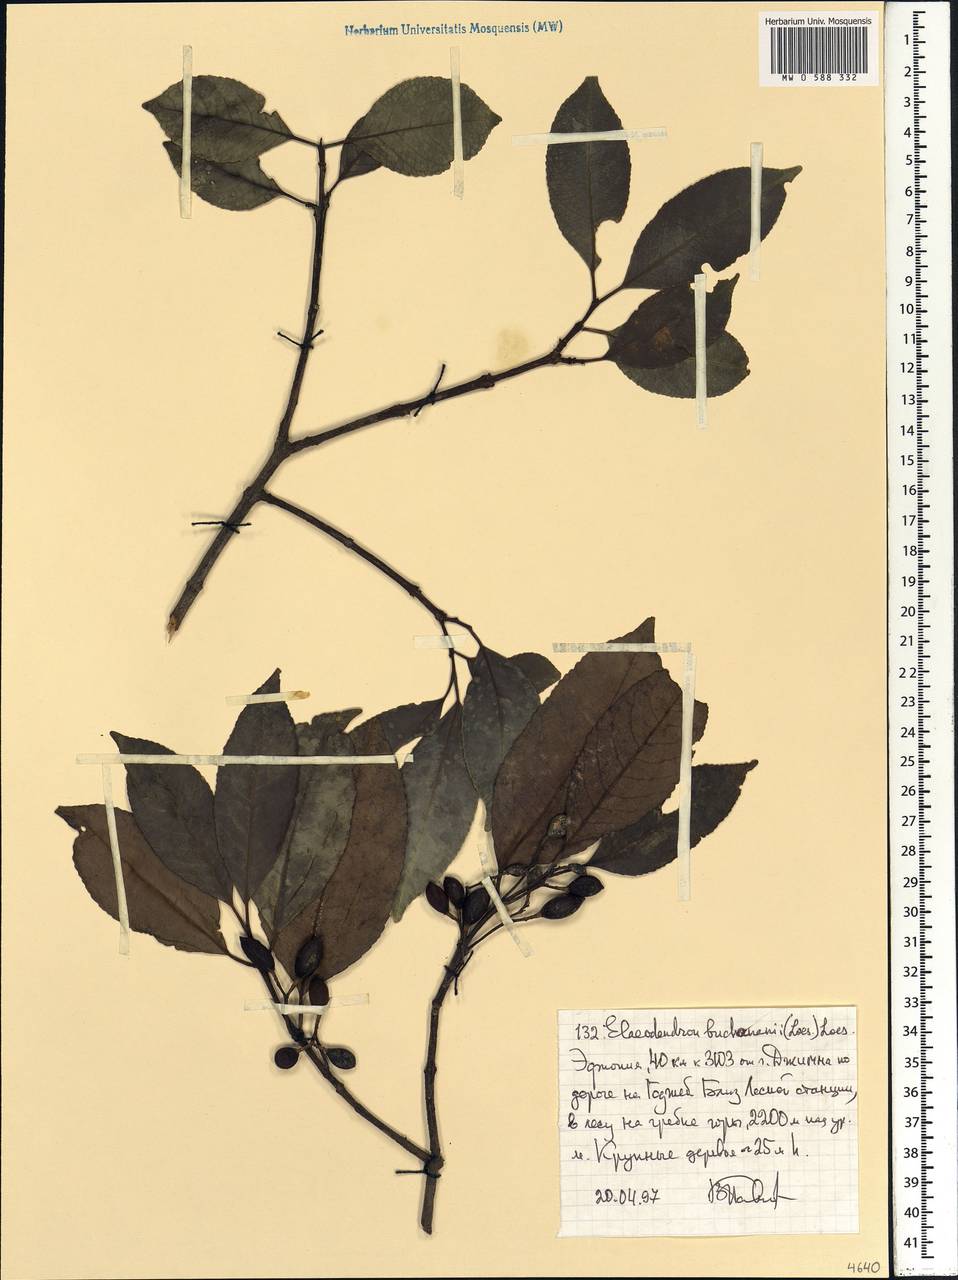 Elaeodendron buchananii (Loes.) Loes., Africa (AFR) (Ethiopia)